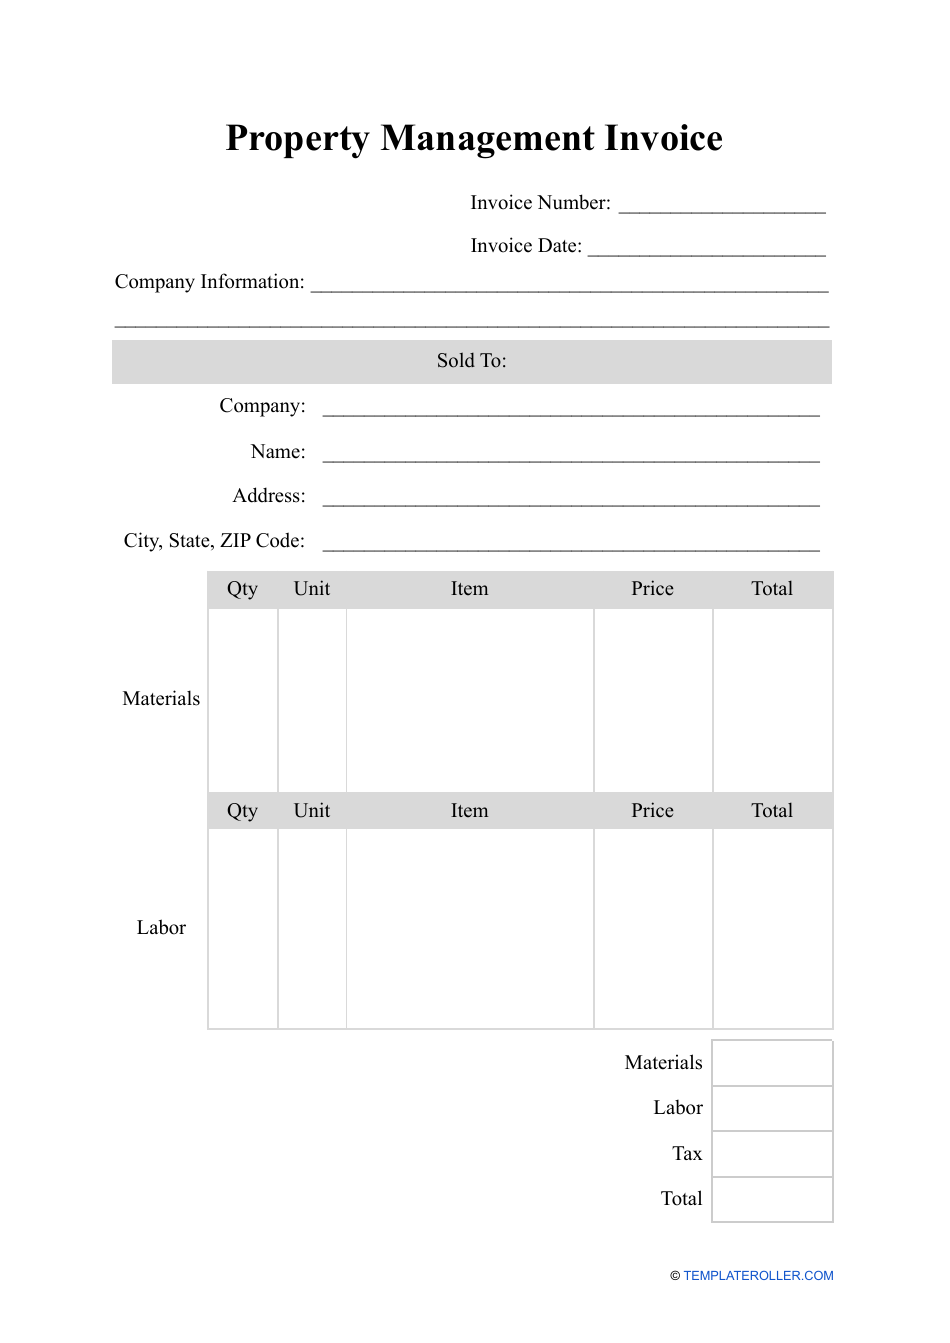 property-management-invoice-template-fill-out-sign-online-and